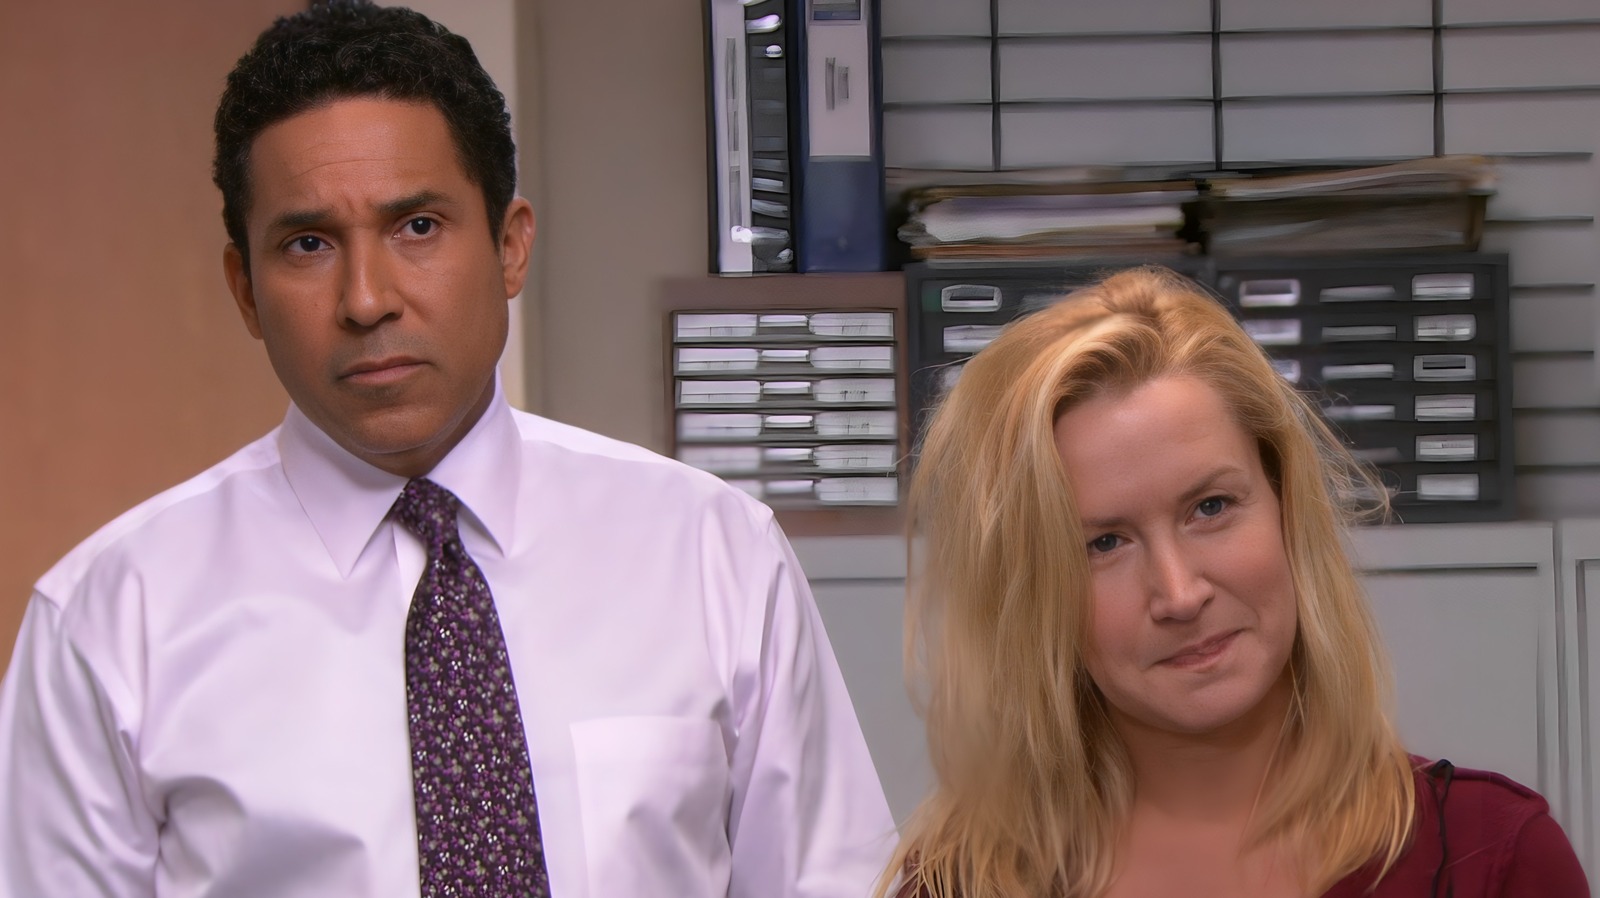 The Worst Thing Oscar Ever Did To Angela On The Office